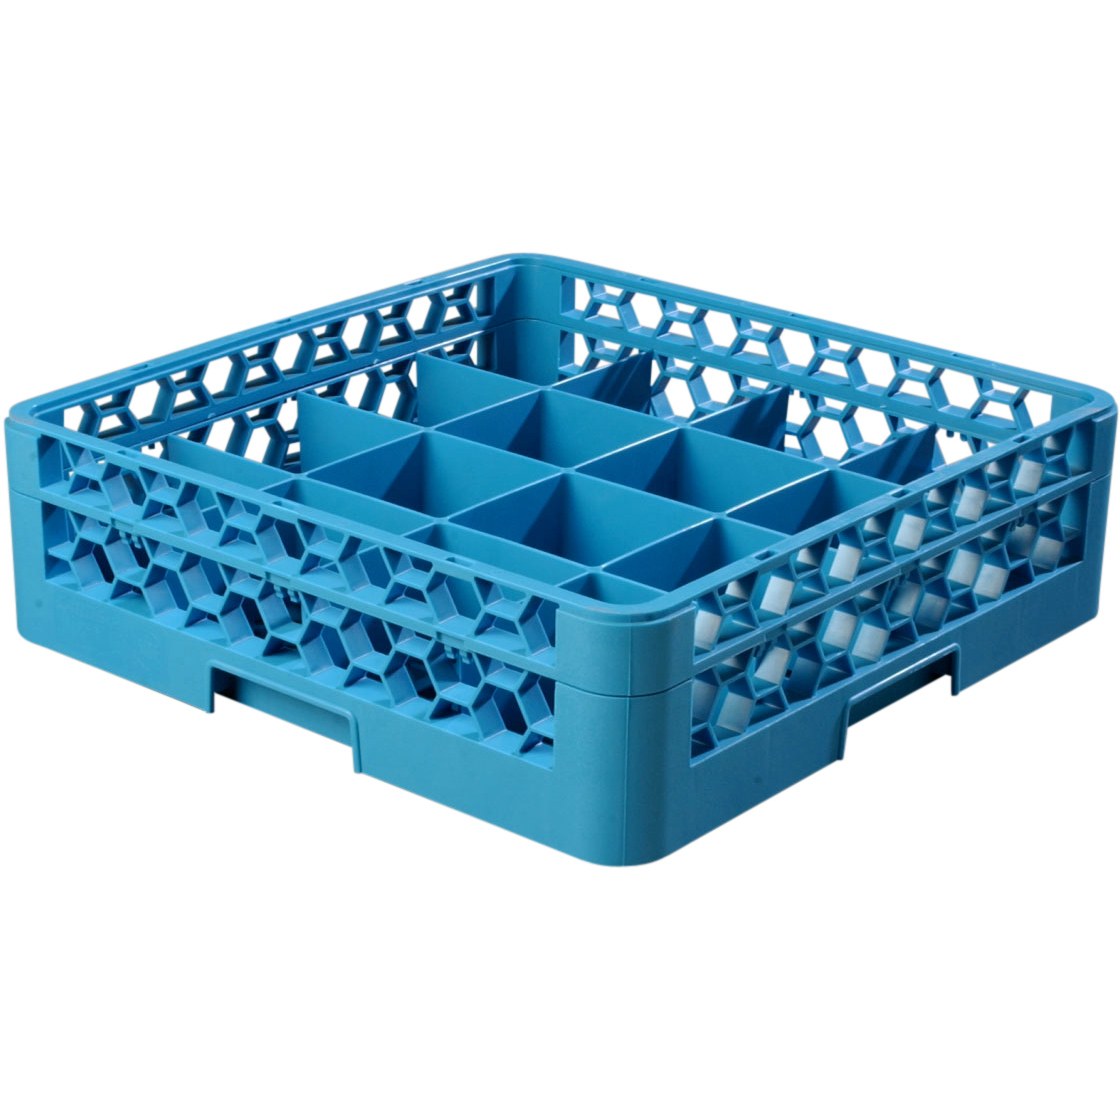 Carlisle OptiClean 16-Compartment Cup Dish Rack with 1 OPEN Extender - Case of 4 image 1